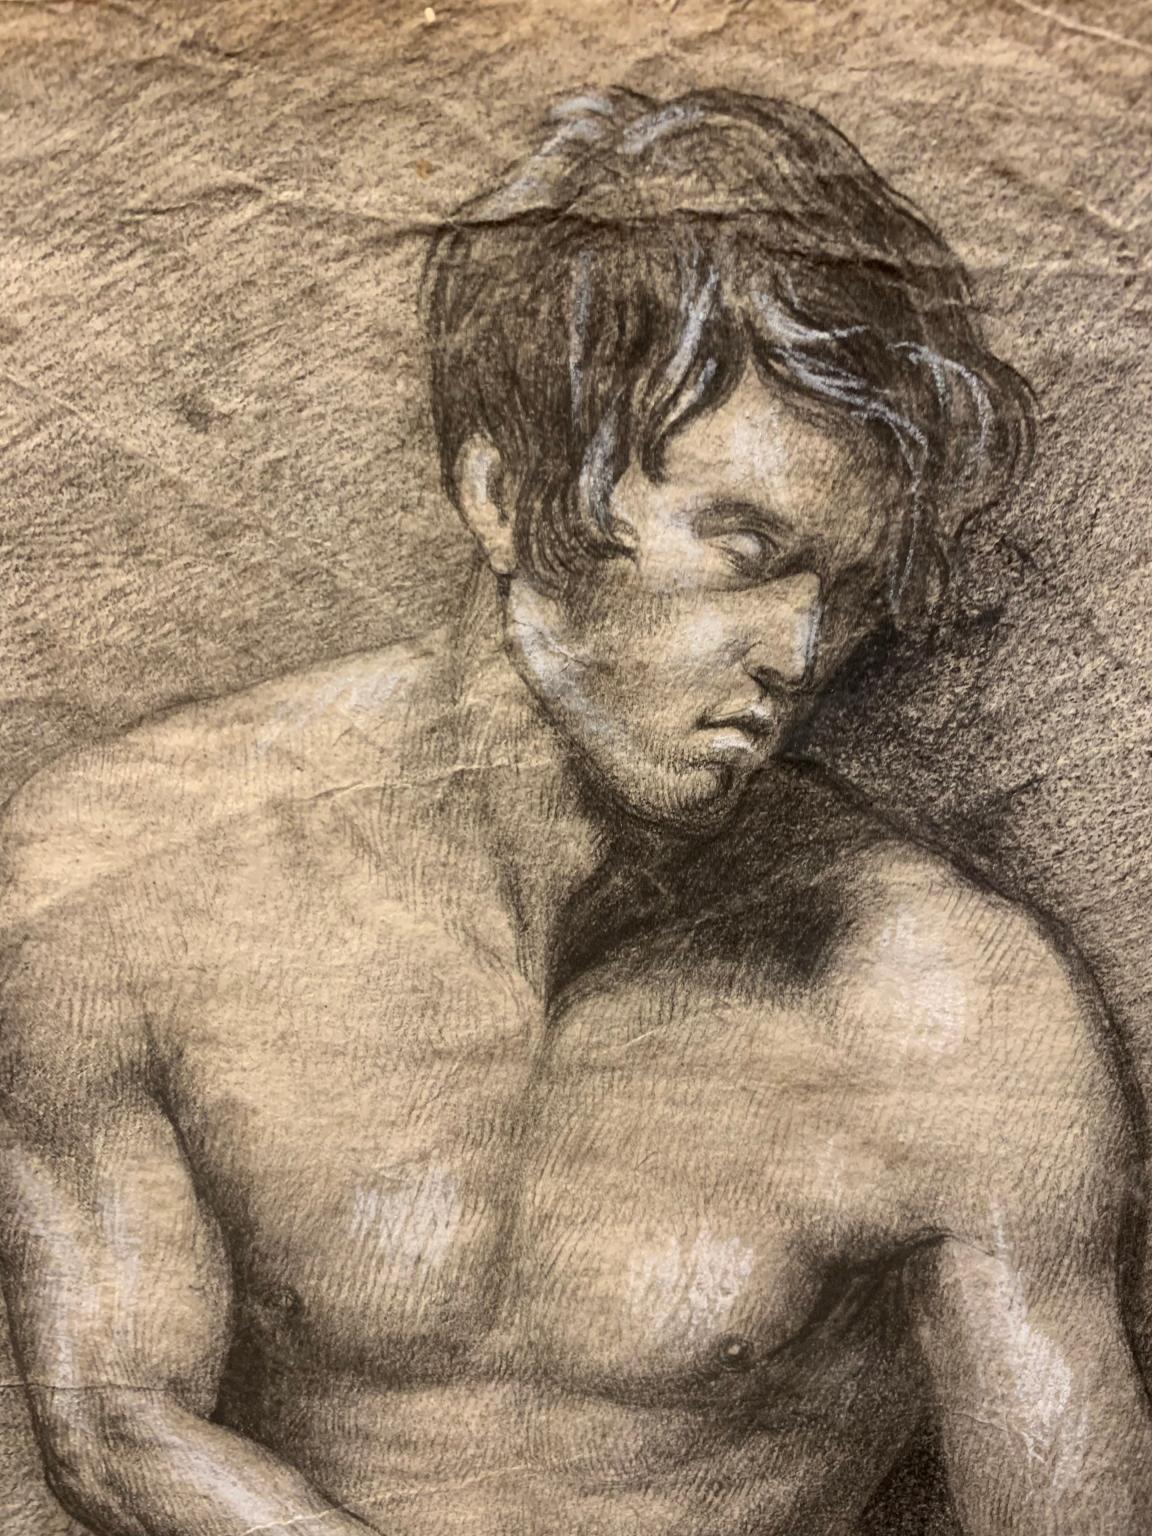 This “Academia” (pencil and white lead on paper, 48 x 32,5 cm) is the kind of study from live that was the most frequent way of training in Arts Academies since the 18th century.
The guy is depicted fully naked, with a vigorous and muscled body,